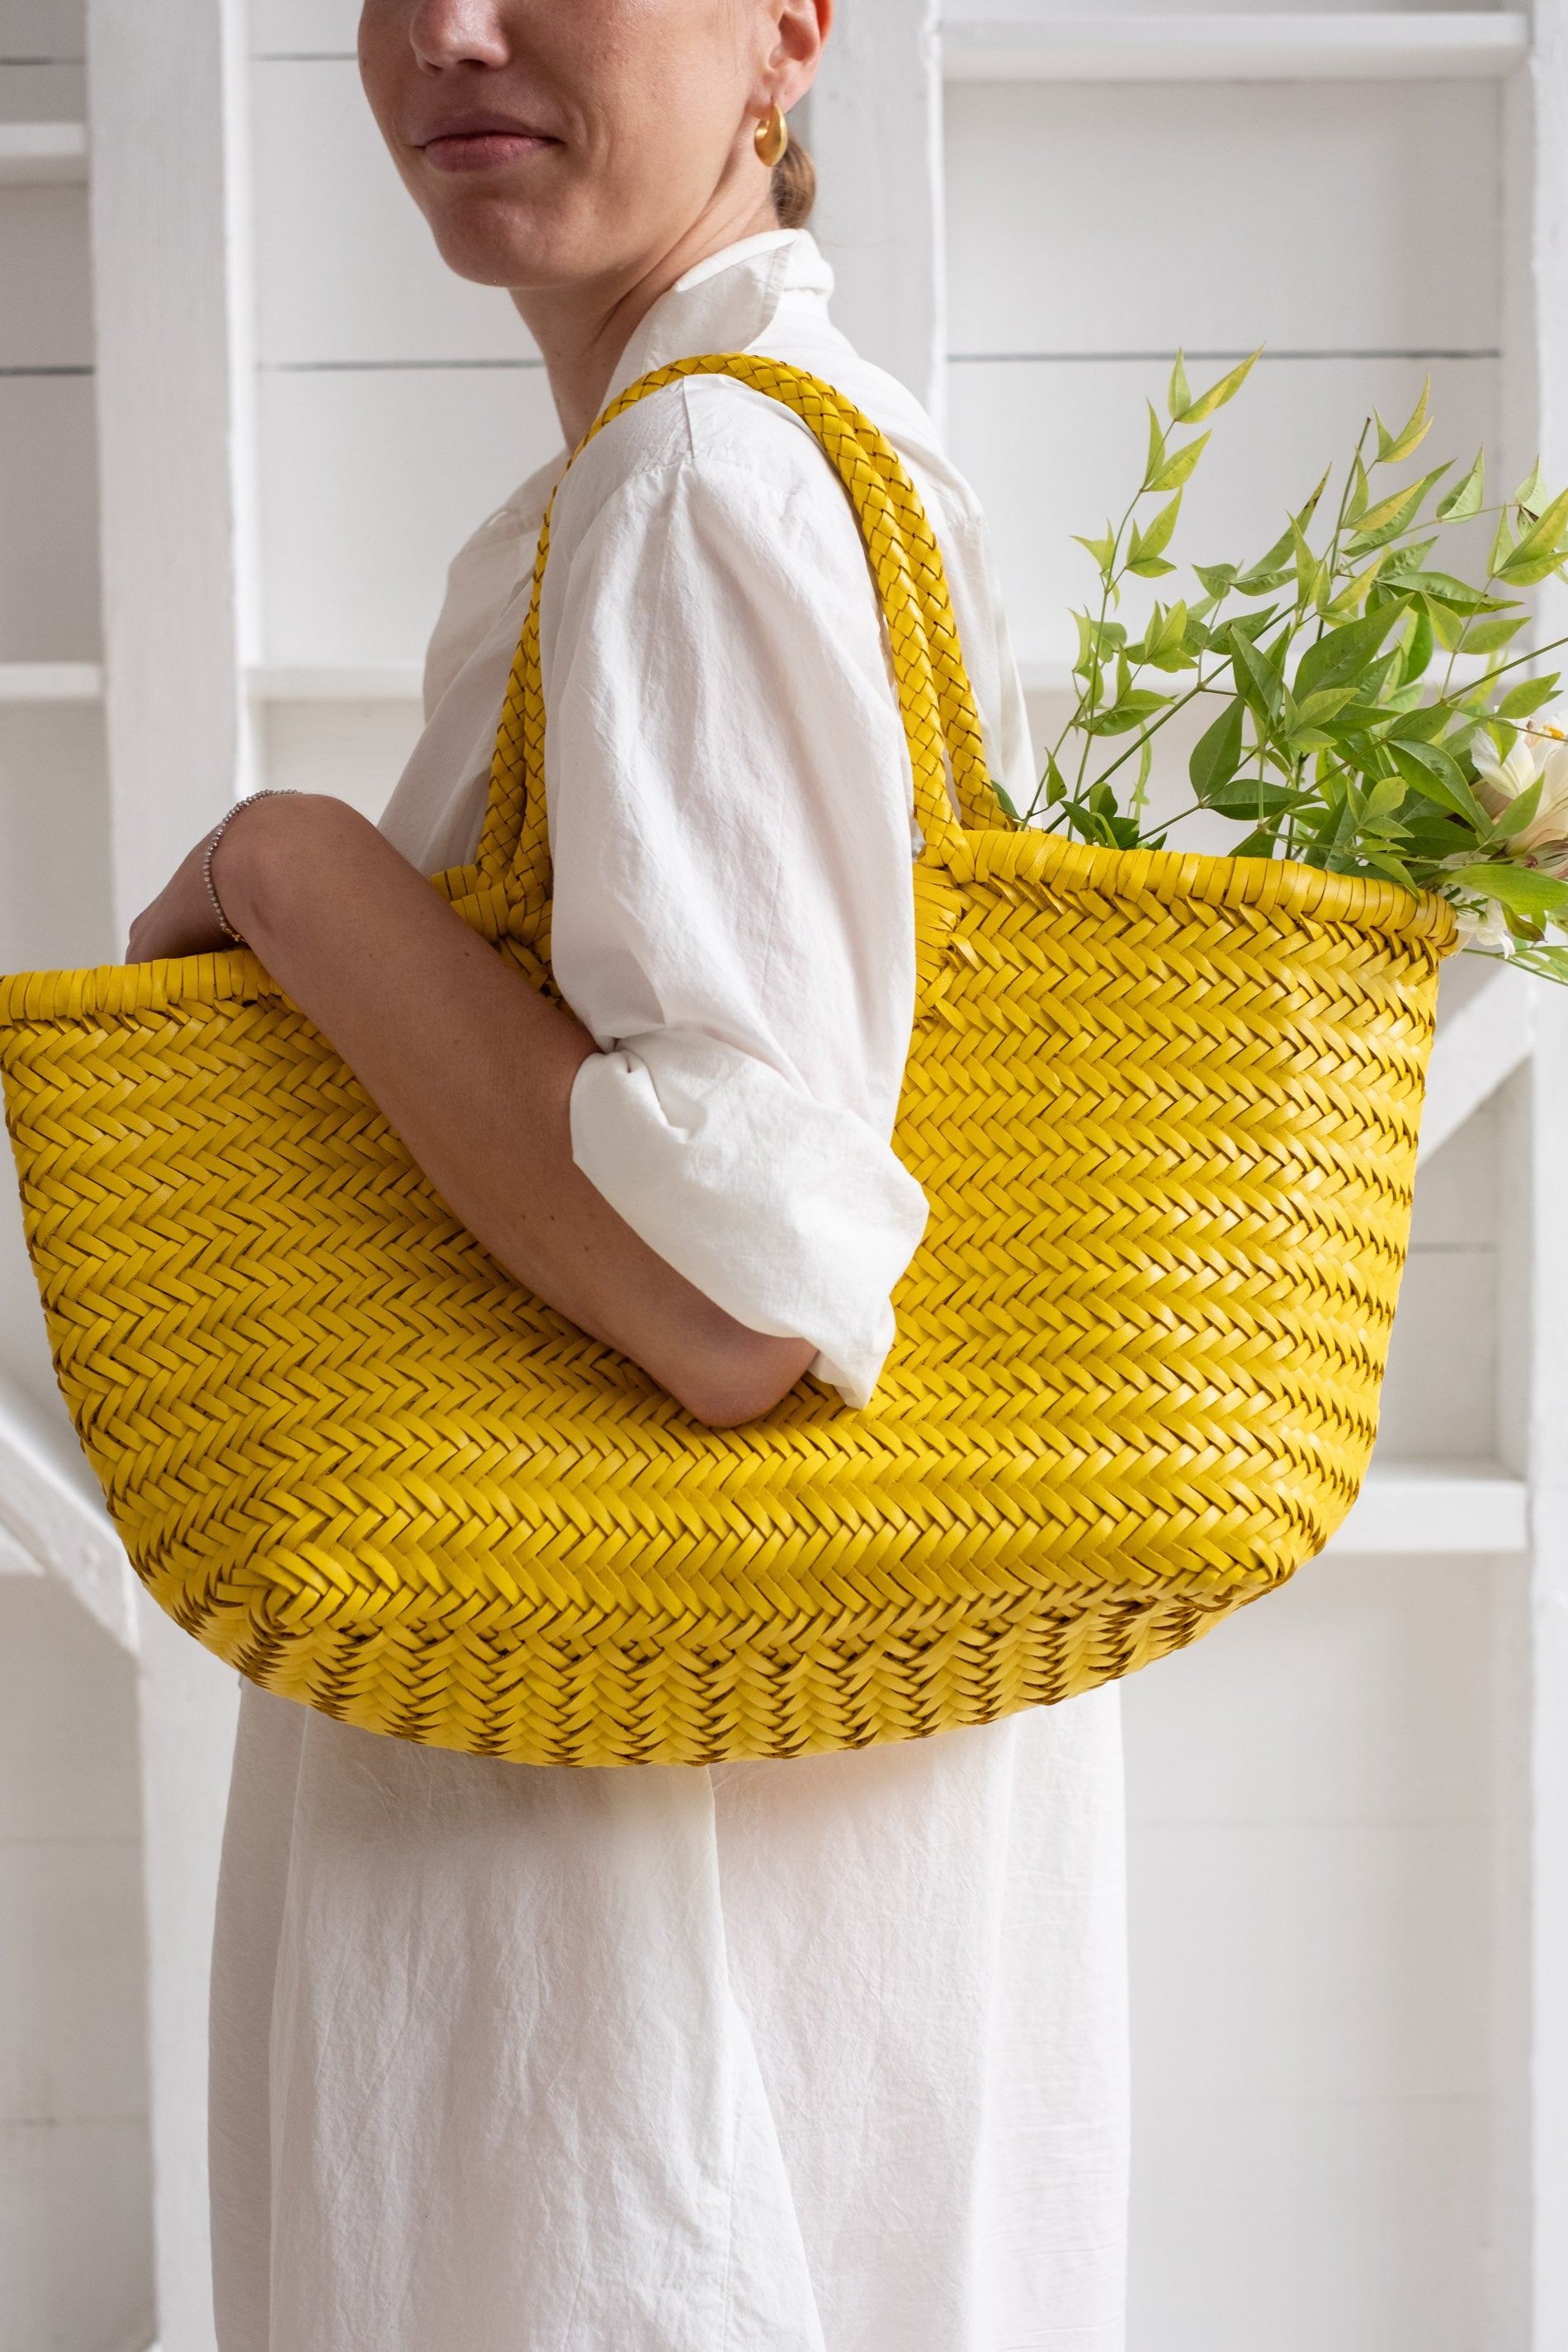 Dragon Diffusion  NANTUCKET BASKET IN BRIGHT YELLOW – RELIQUARY